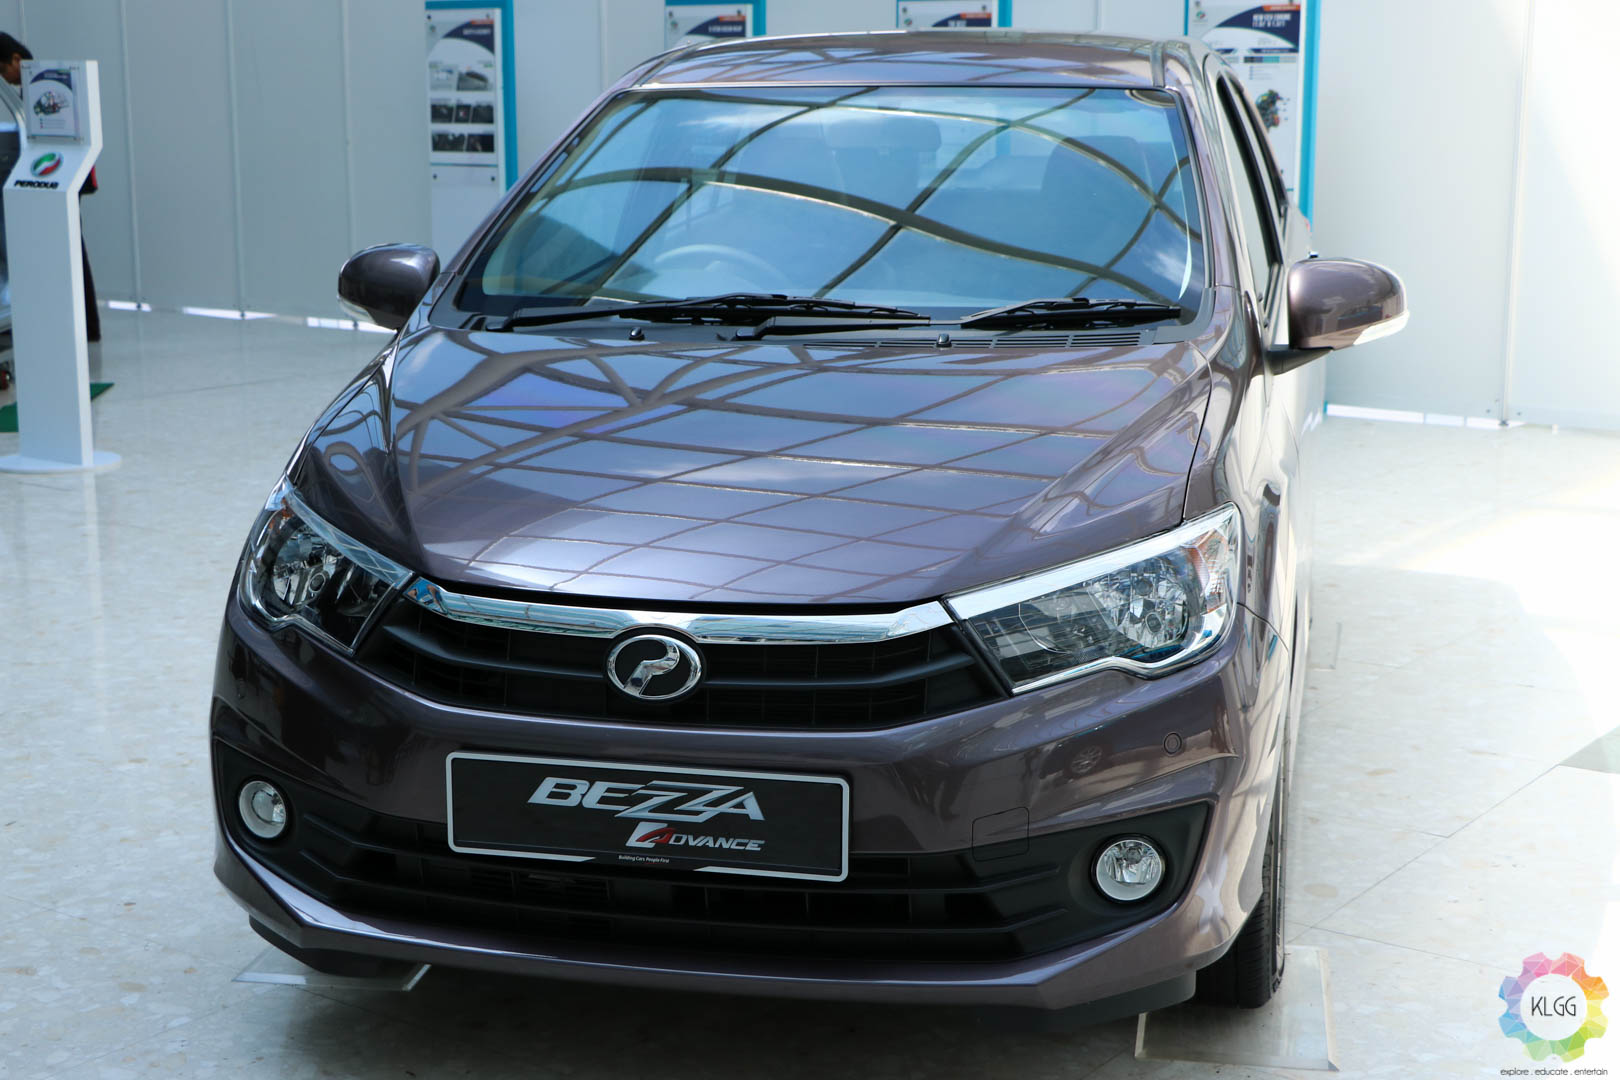 The Perodua Bezza is a feature packed A segment sedan with 